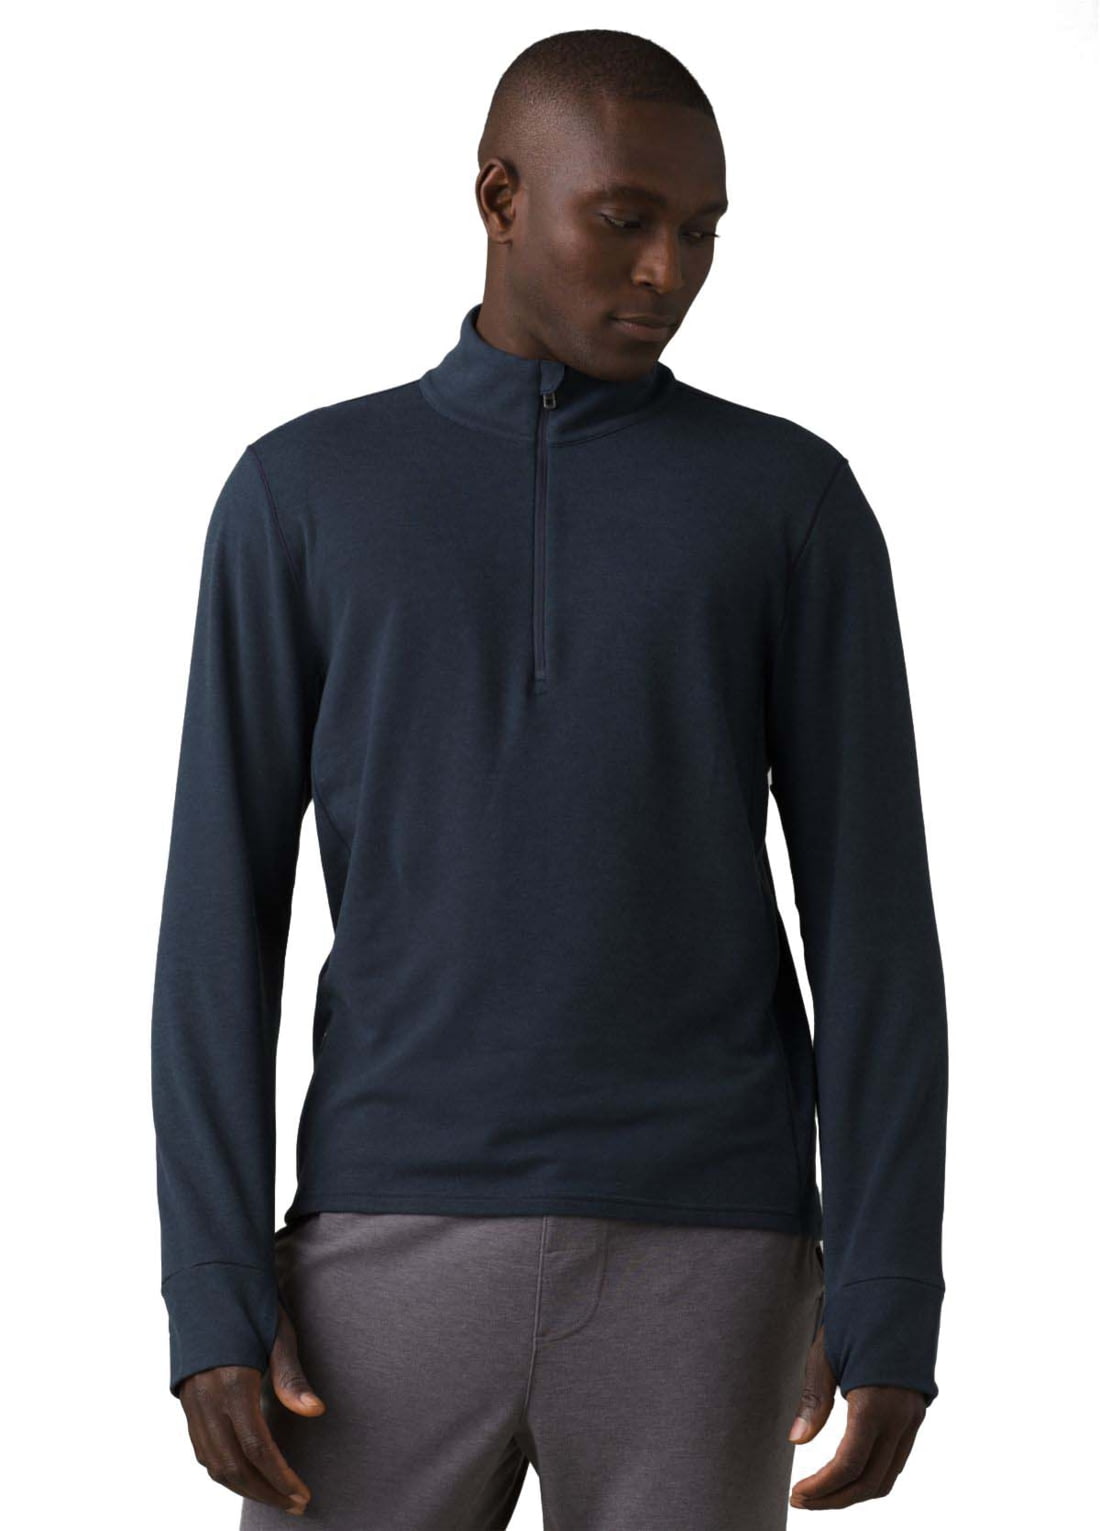 Great Prices prAna Altitude Tracker 1/4 Zip - Mens Outlet Sale